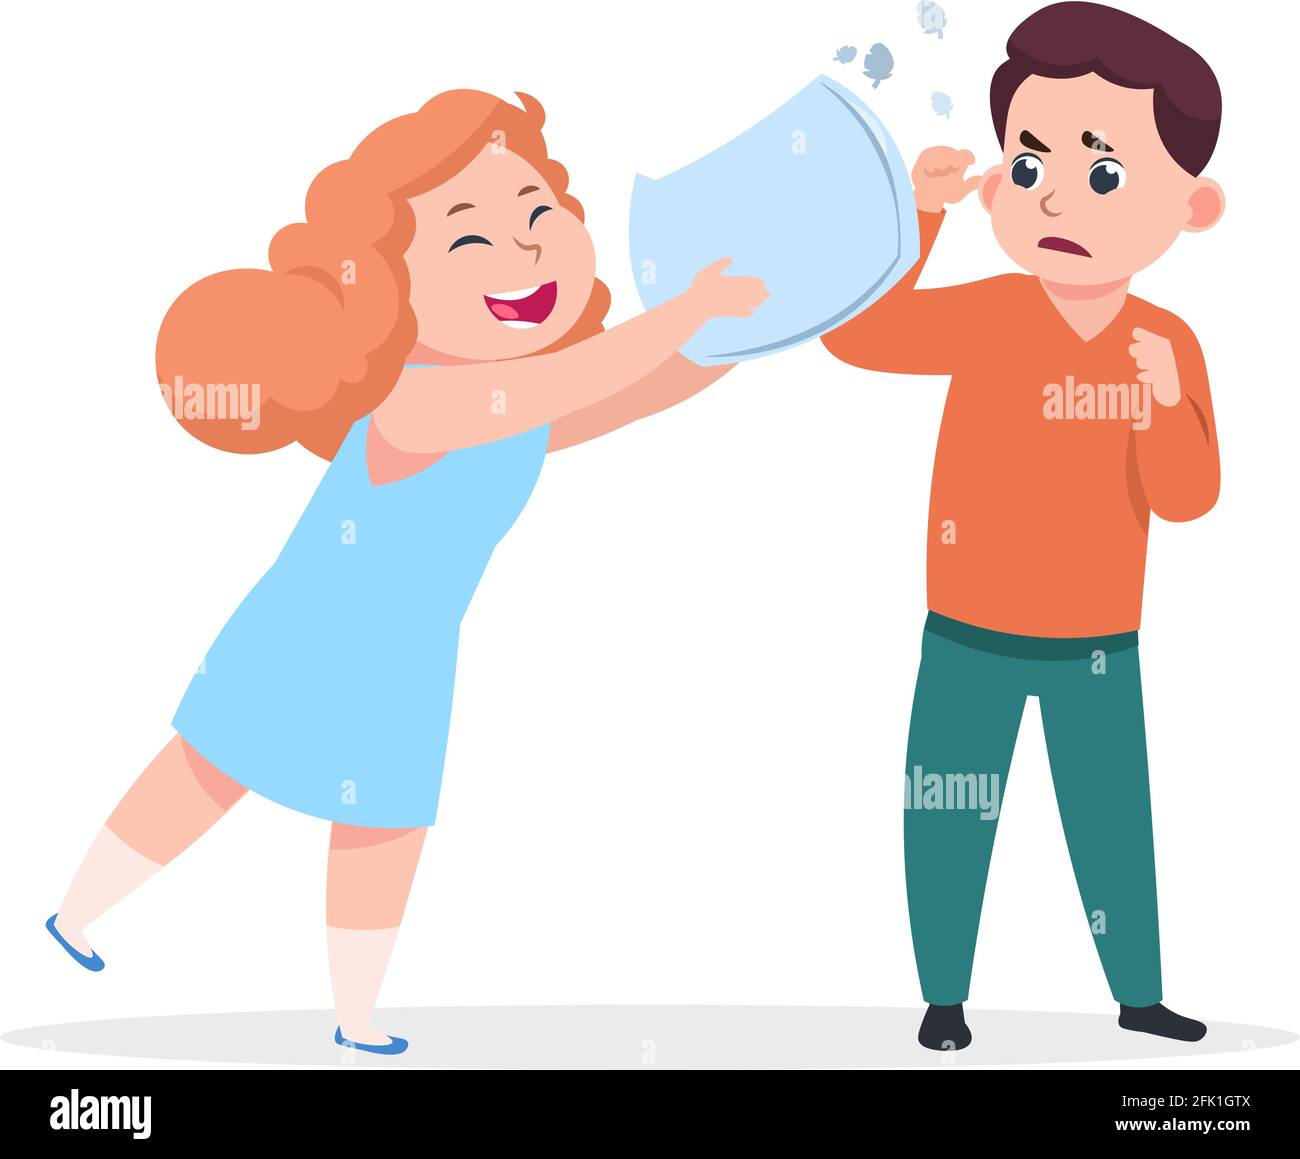 Pillow fight. Cheerful girl beats displeased boy. Aggression, bad manners and evil games. Child misbehavior, preschool kids vector illustration Stock Vector